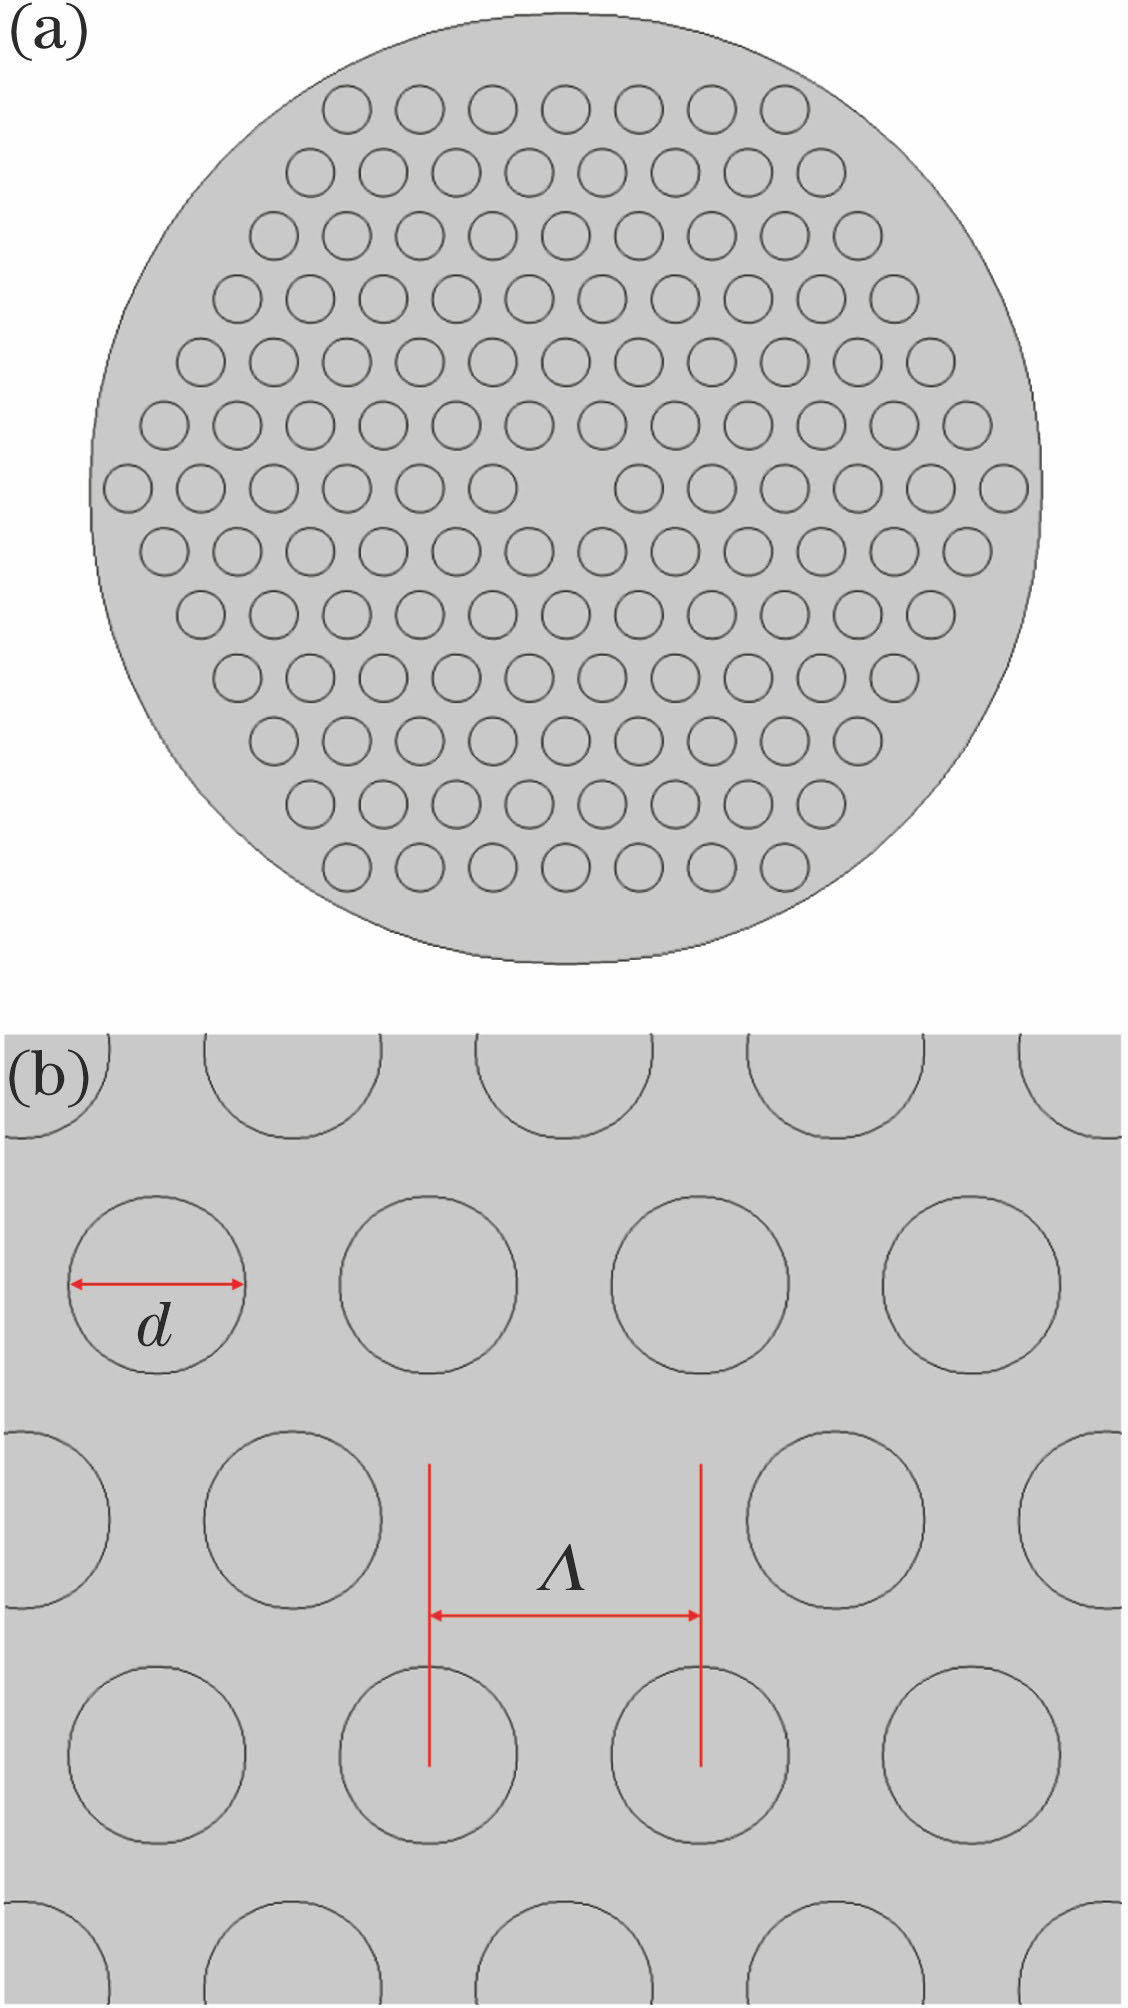 Schematic of photonic crystal fiber. (a) Cross-sectional view; (b) detail view